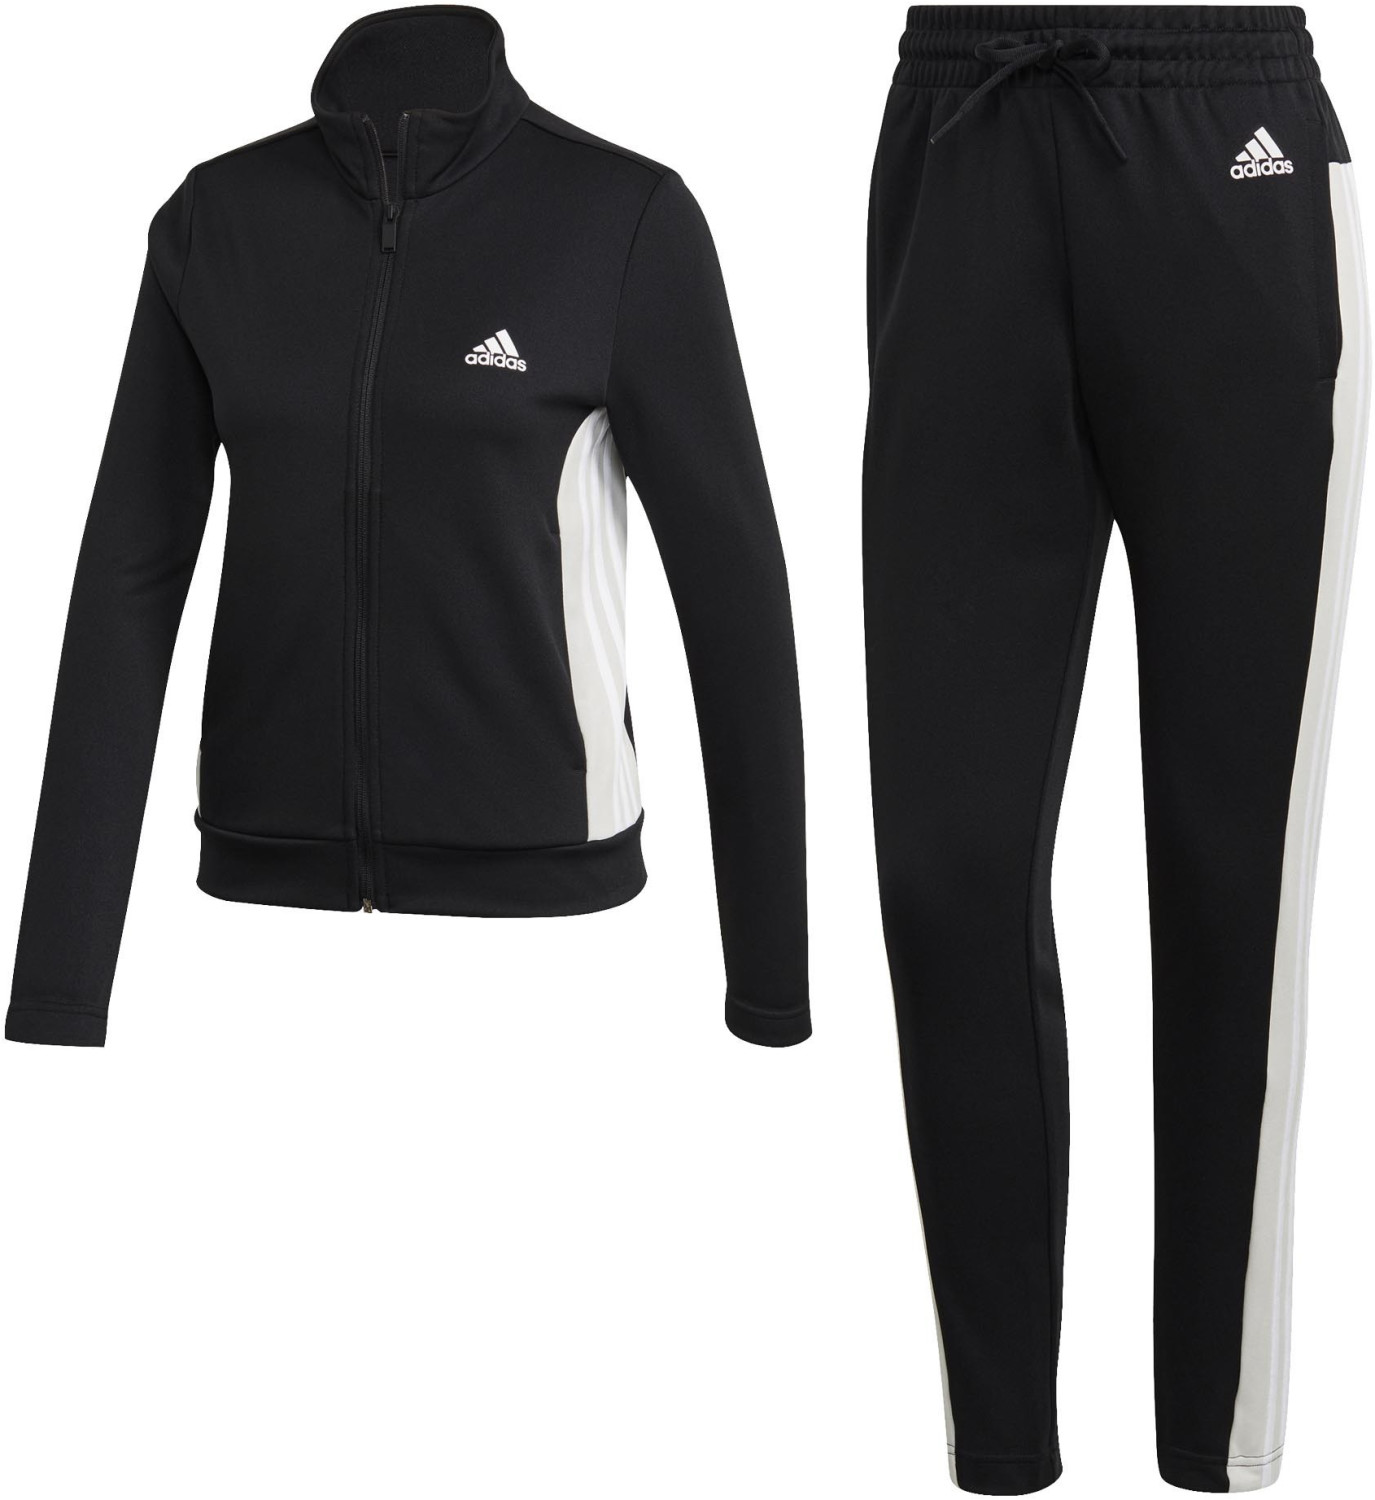 Buy Adidas Team Sport Tracksuit Women black/black from £52.92 (Today ...